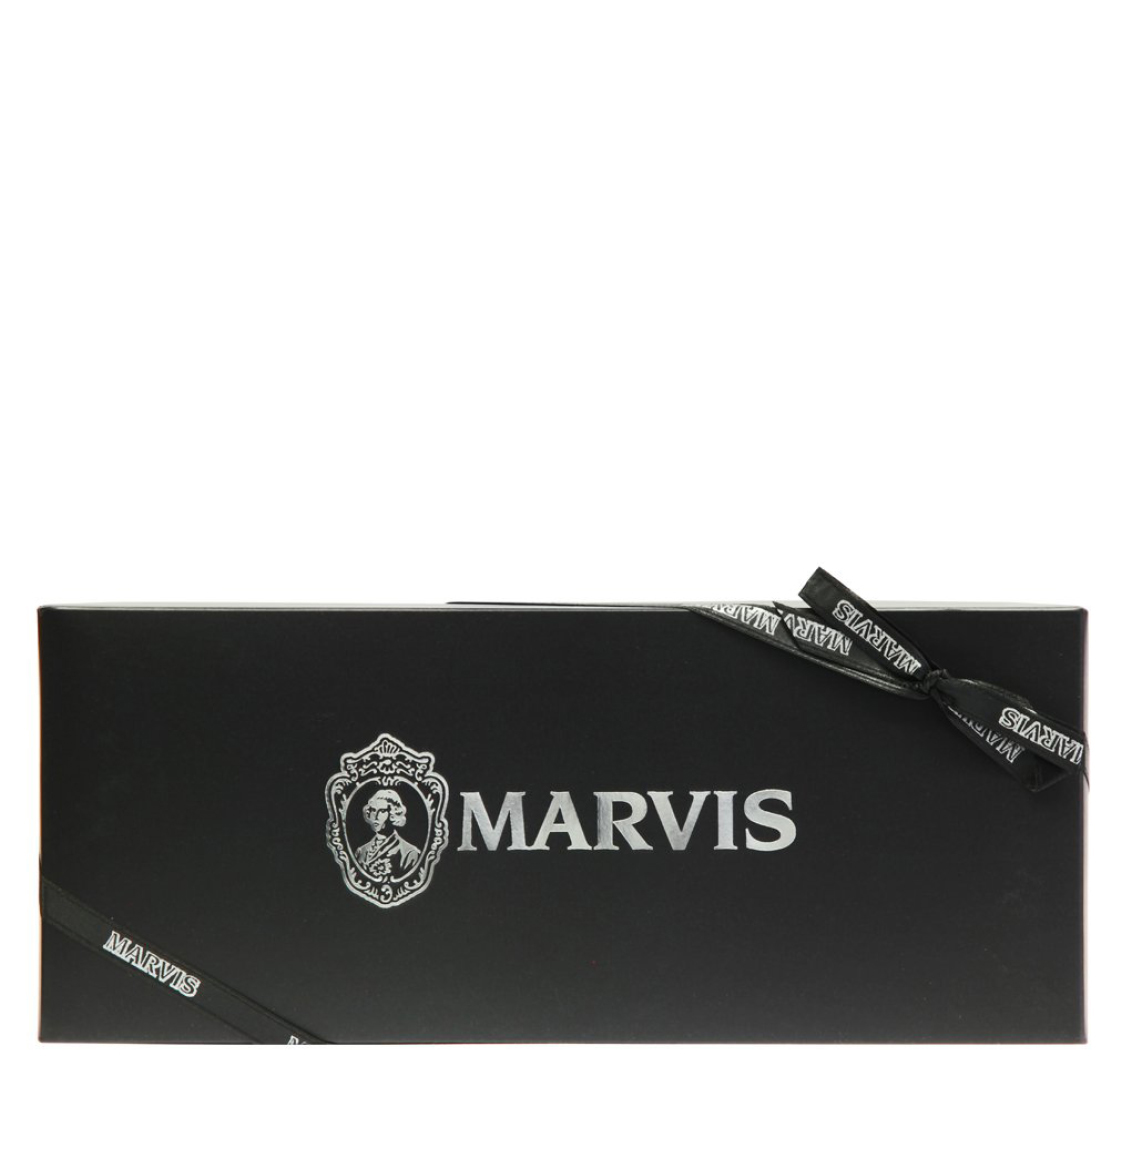 Marvis Toothpaste Black Box Collection 7 x 25ml